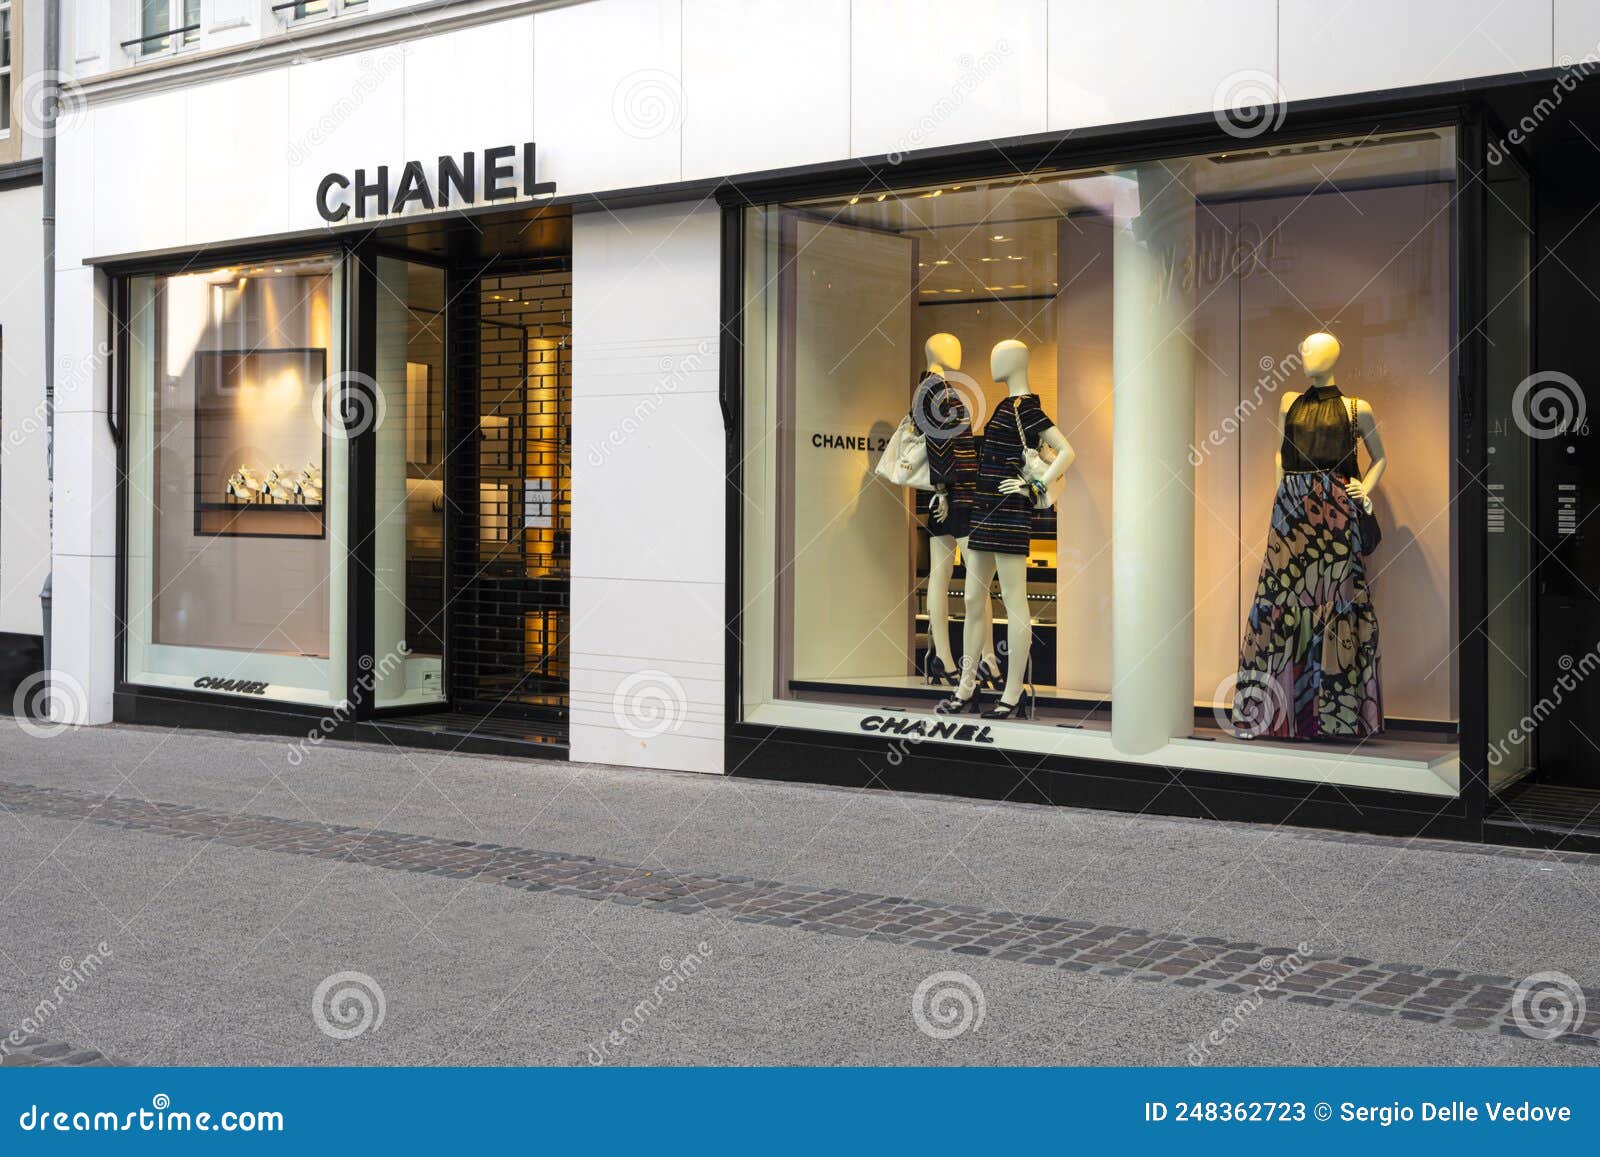 Chanel Brand Shop in Luxembourg Editorial Stock Photo - Image of ...